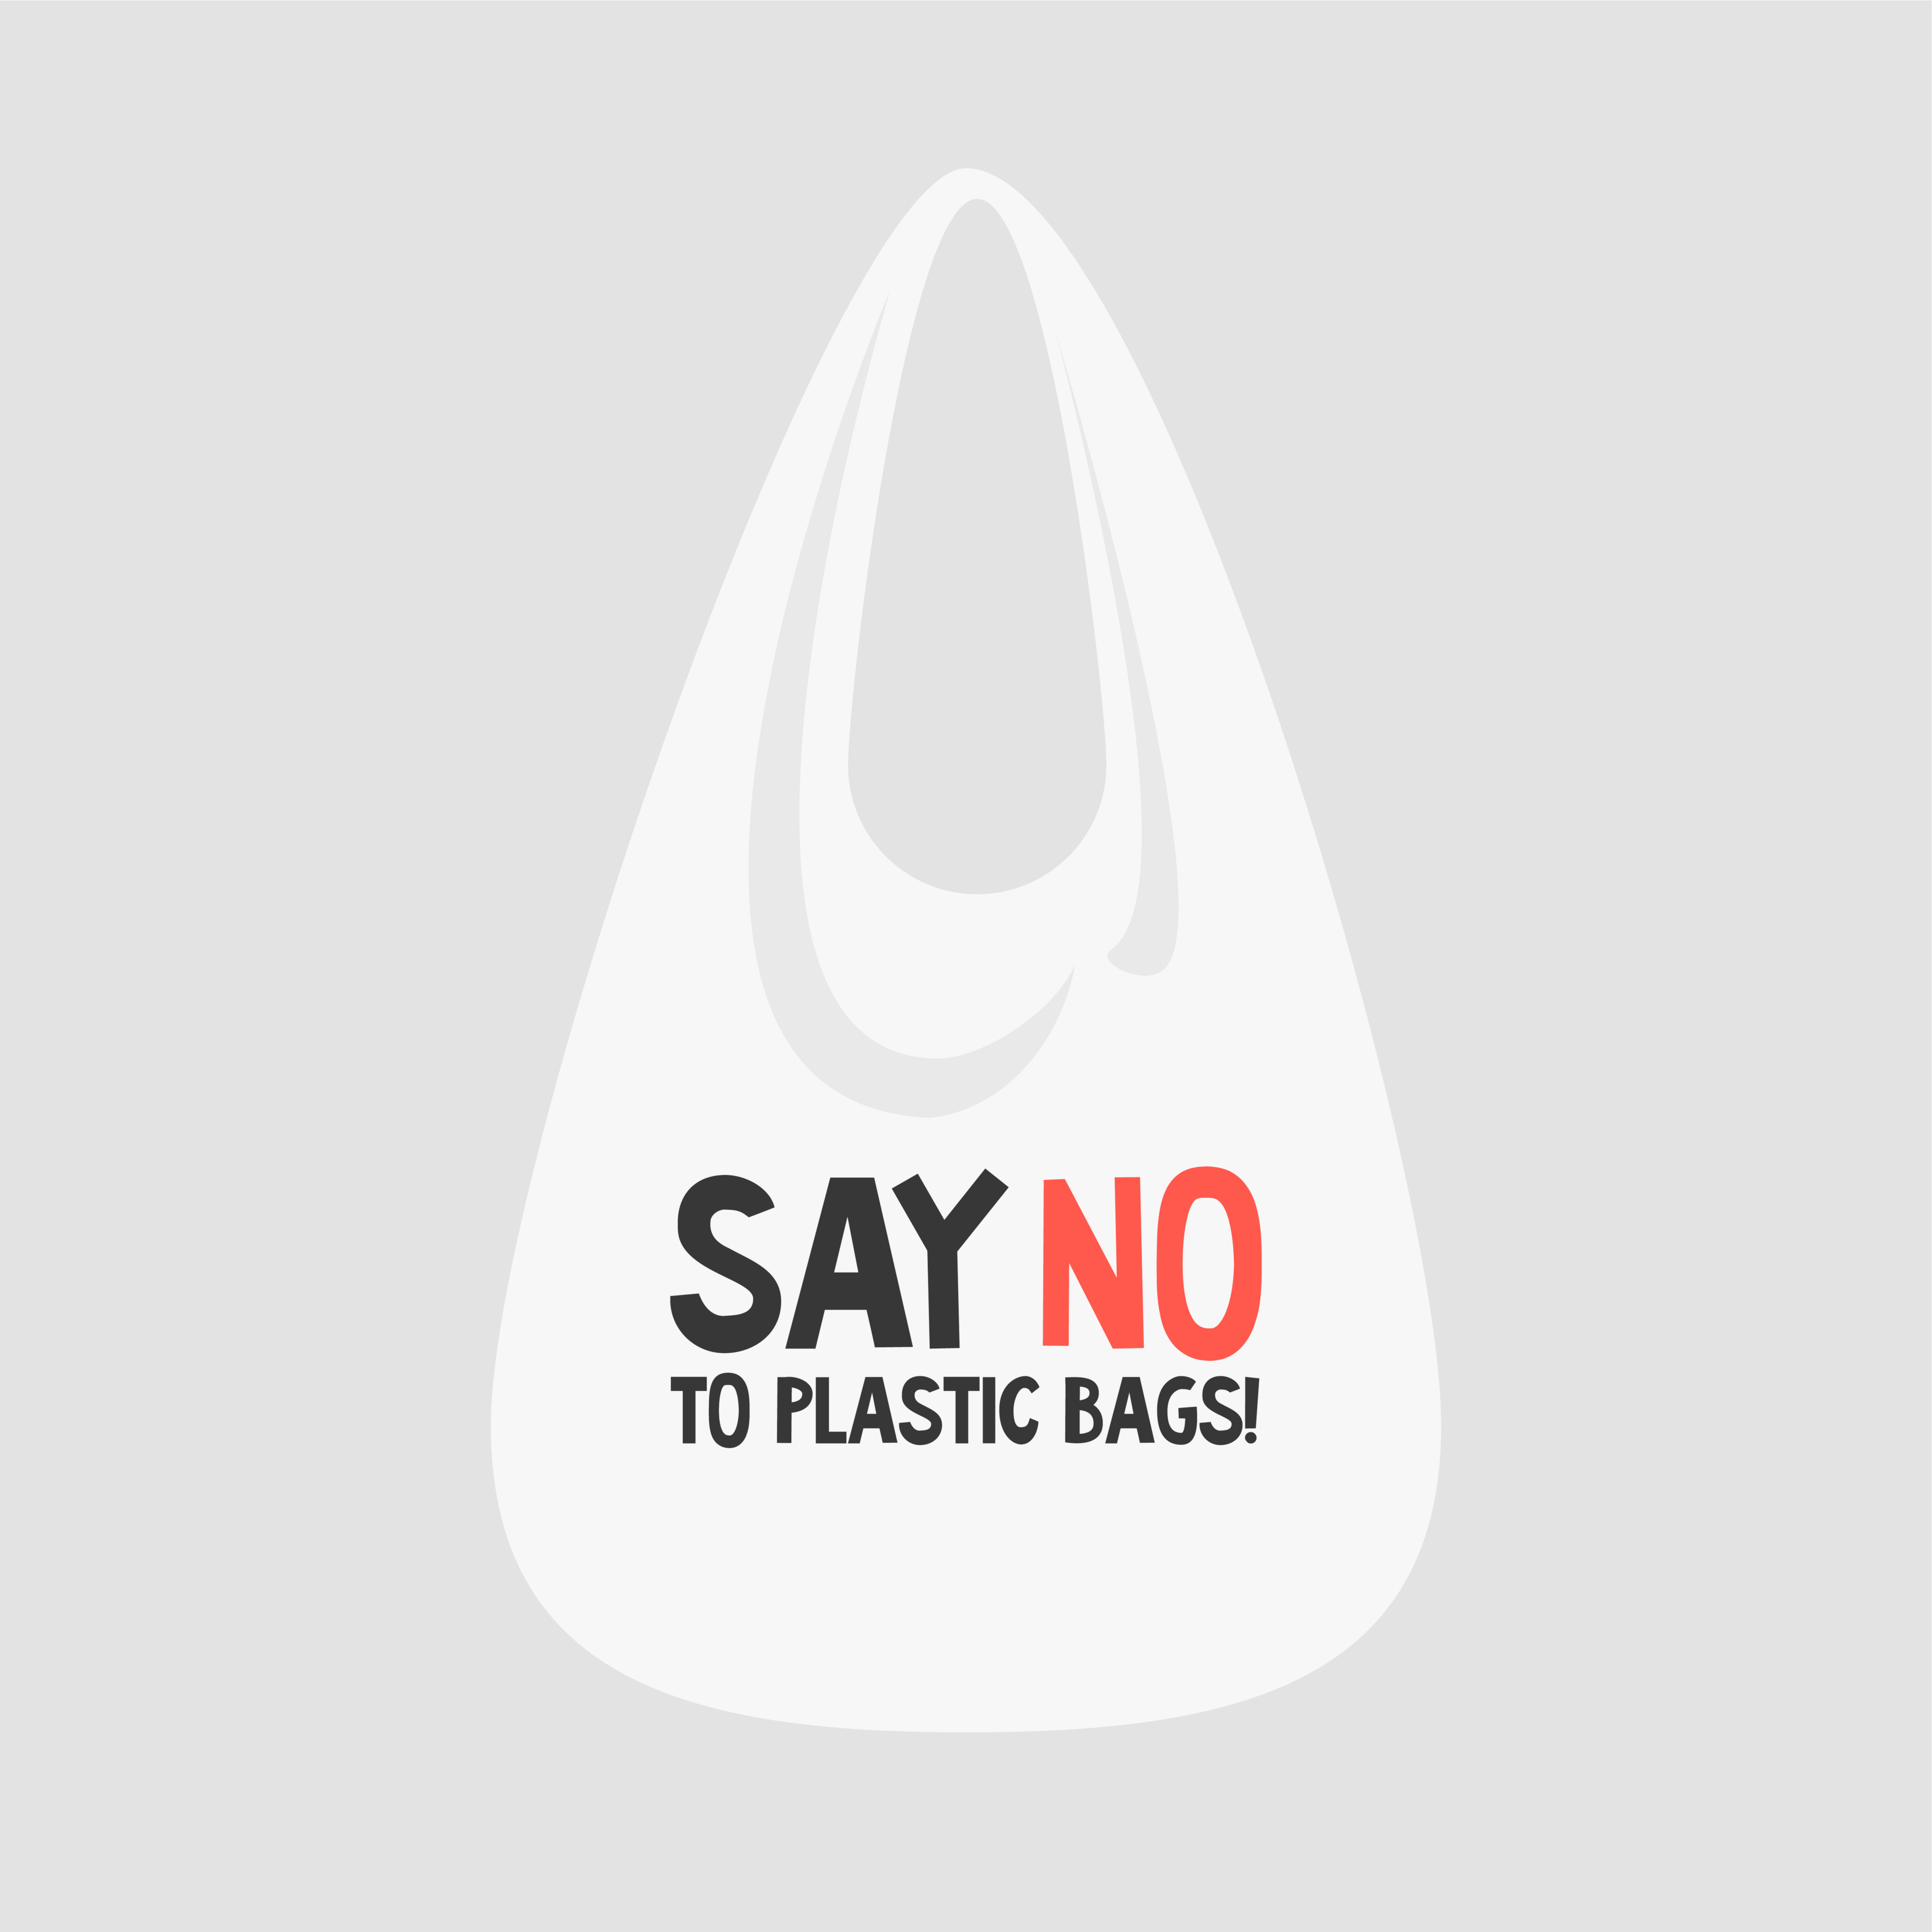 Better NOT use plastic bags